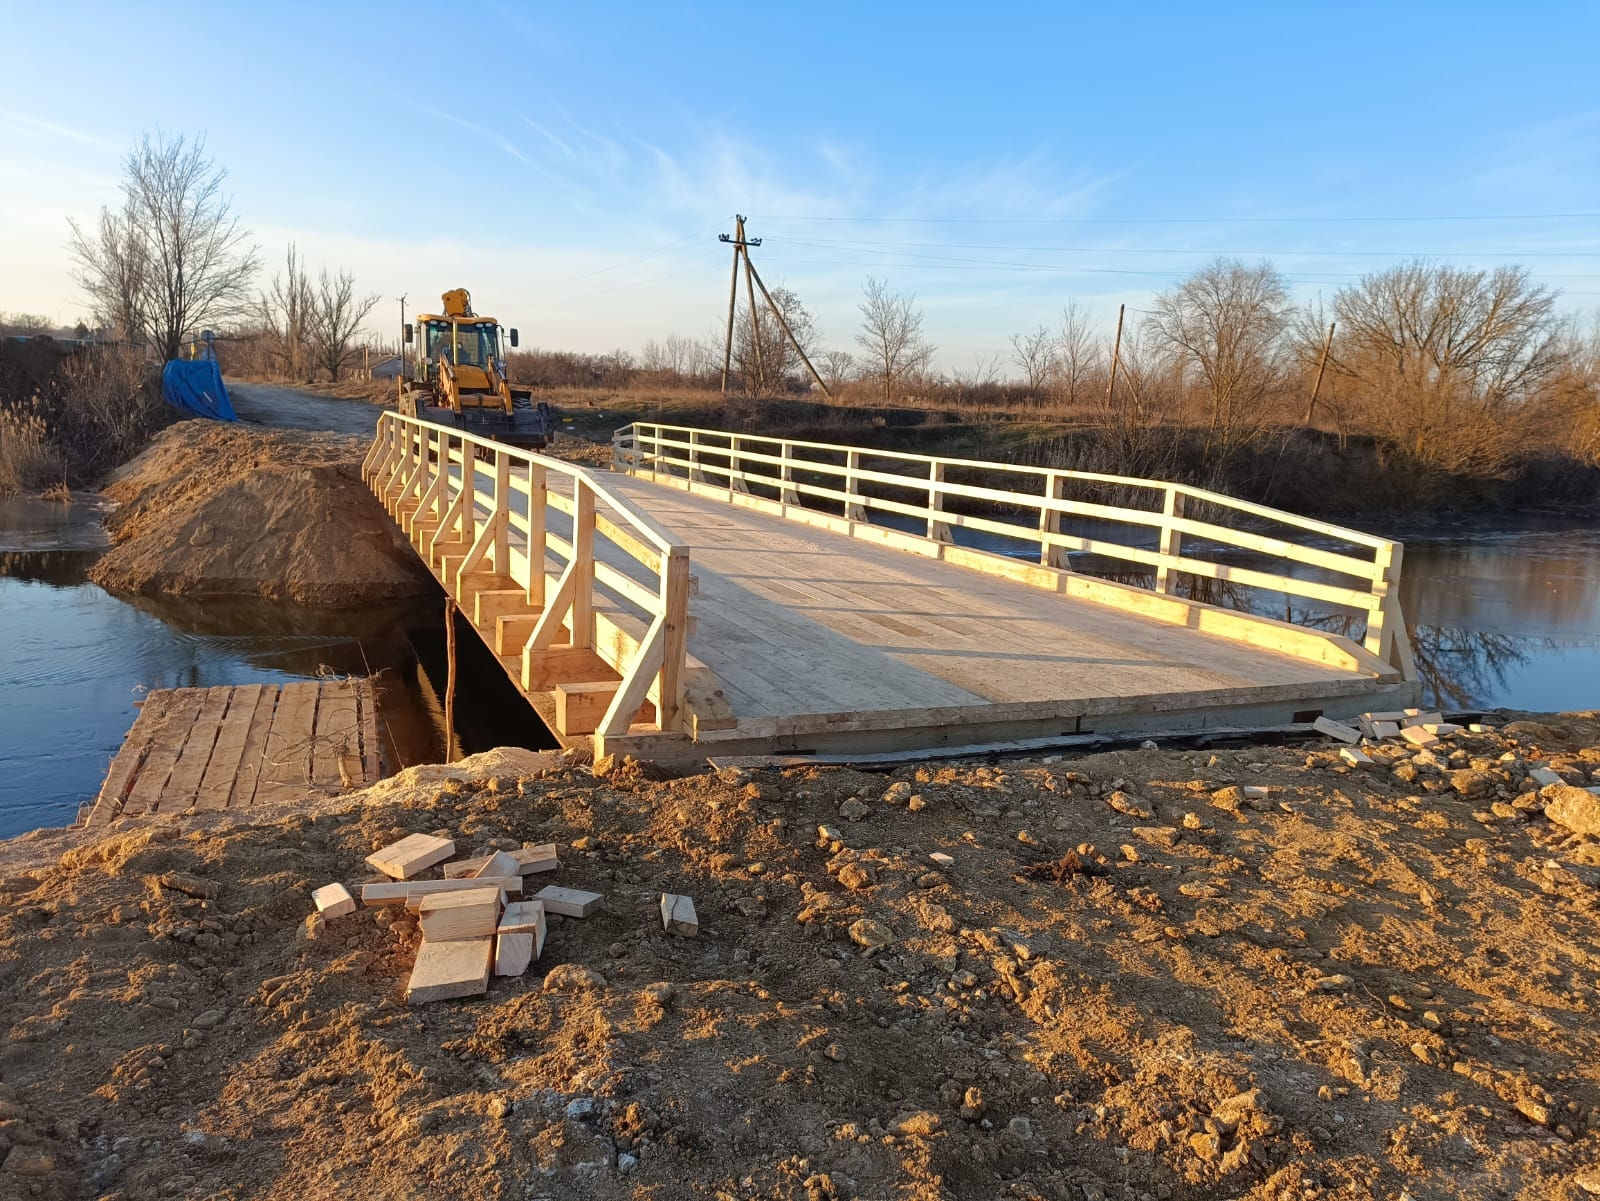 Thanks to UNITED24’s Donors, Two Temporary Bridges Have Been Built Over the Inhulets River